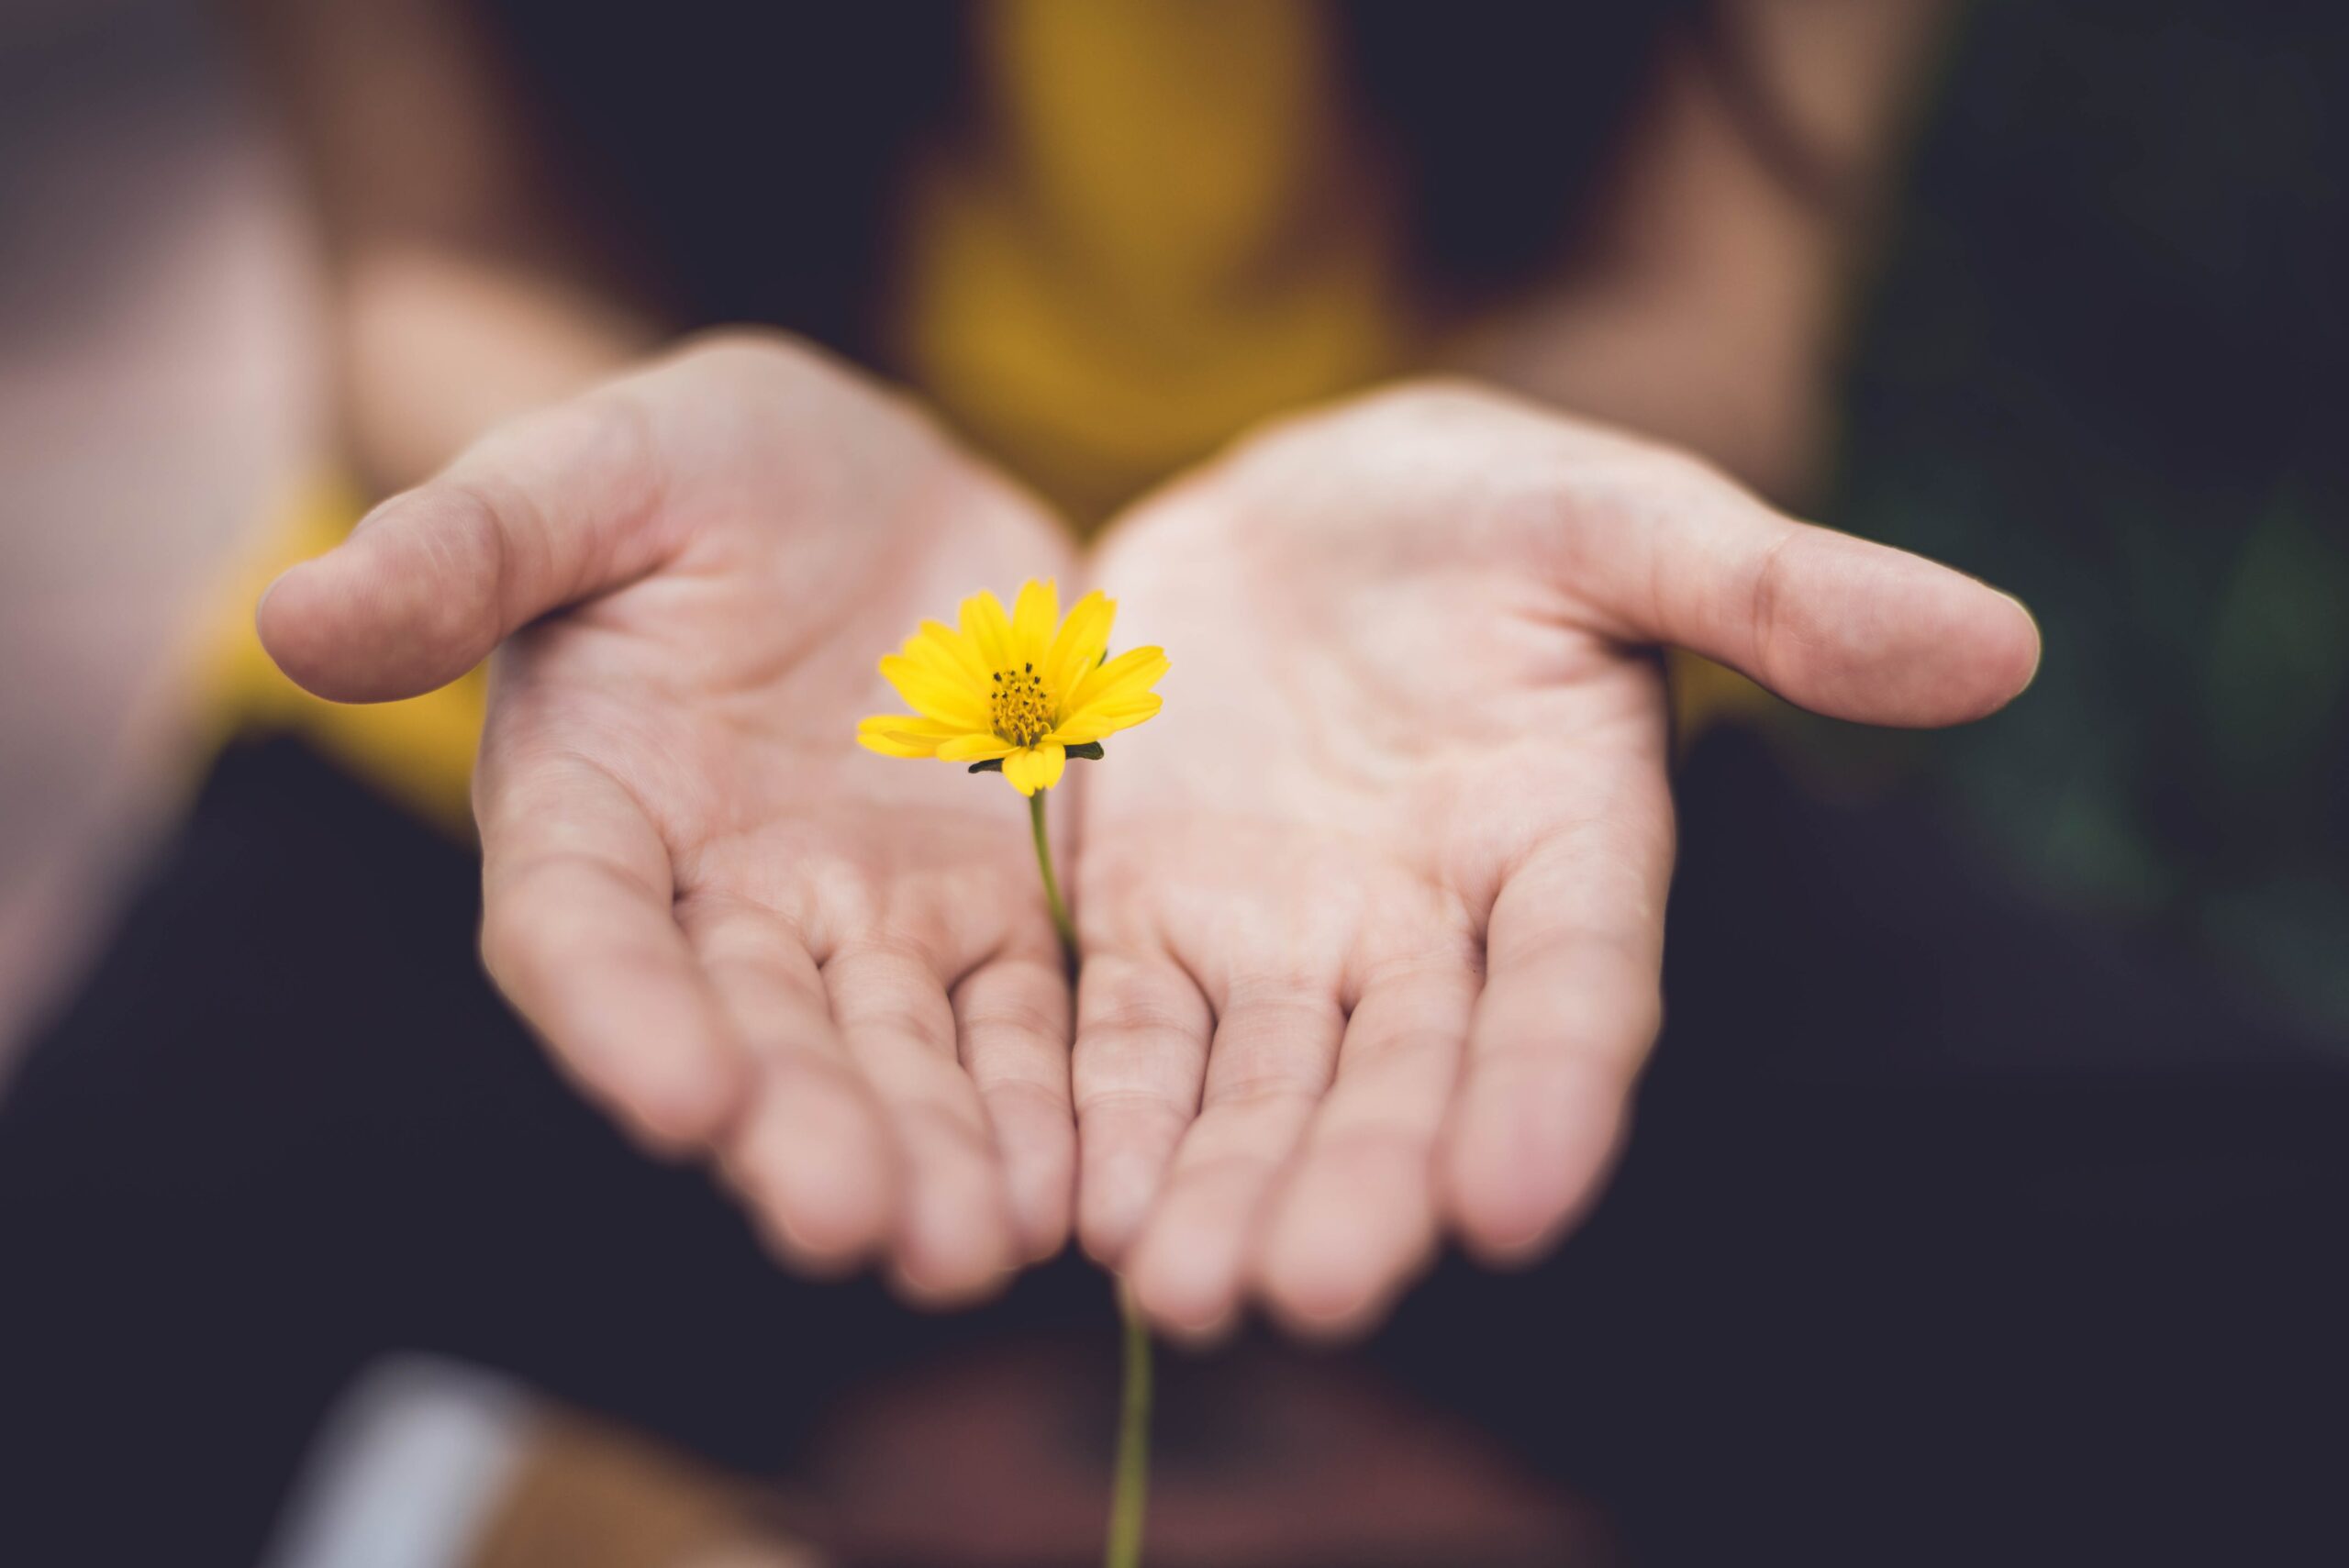 The image represents two hands cupping a flower to protect it from adverse conditions. Improving social value in social care will allow people in care to thrive, reducing their dependency on care services and benefiting the community.